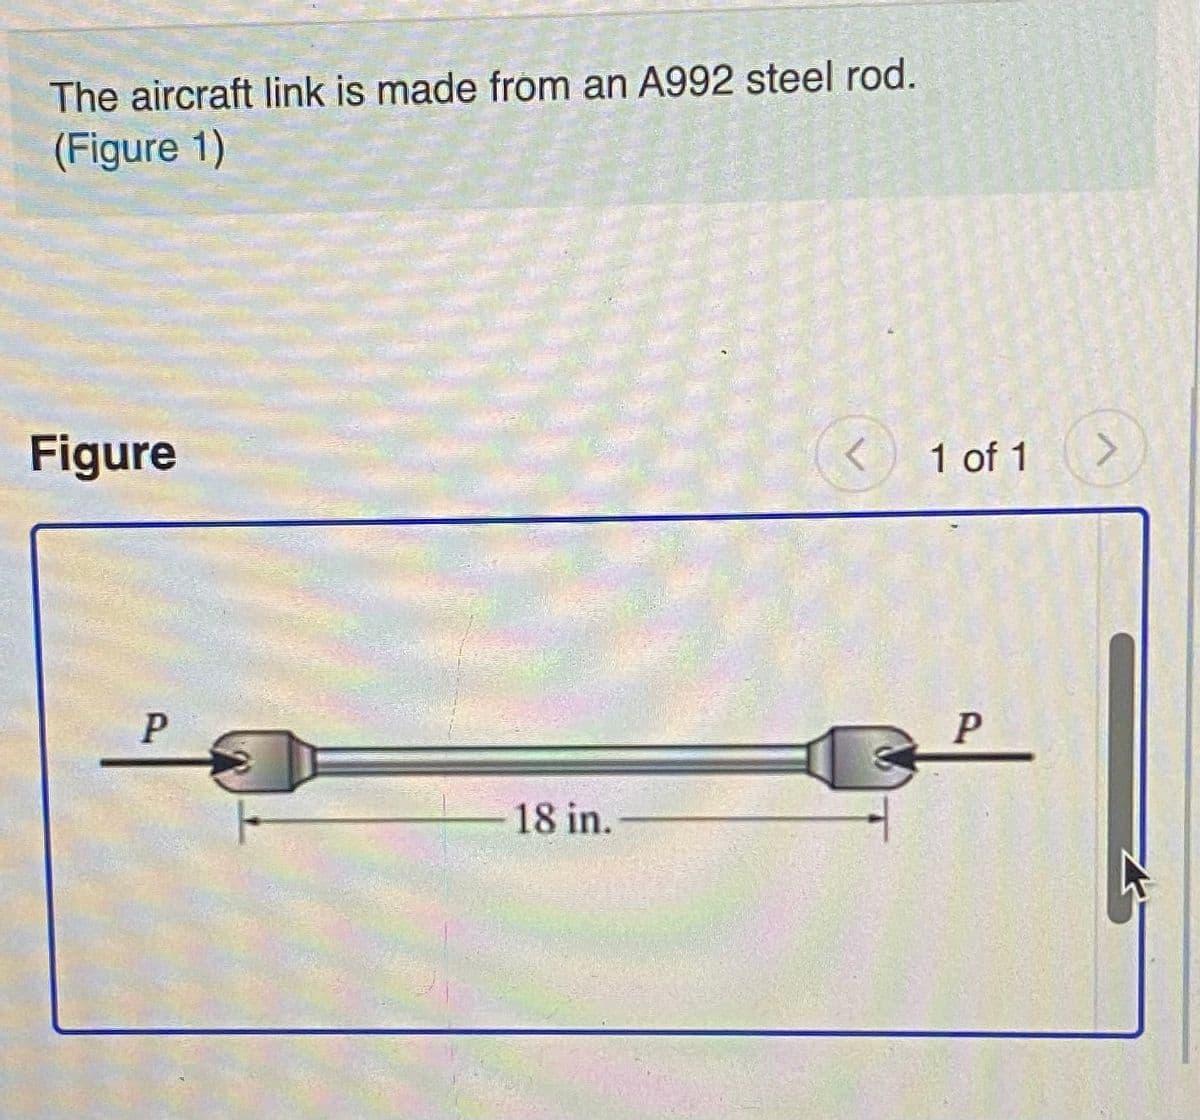 The aircraft link is made from an A992 steel rod.
(Figure 1)
Figure
1 of 1
18 in.
